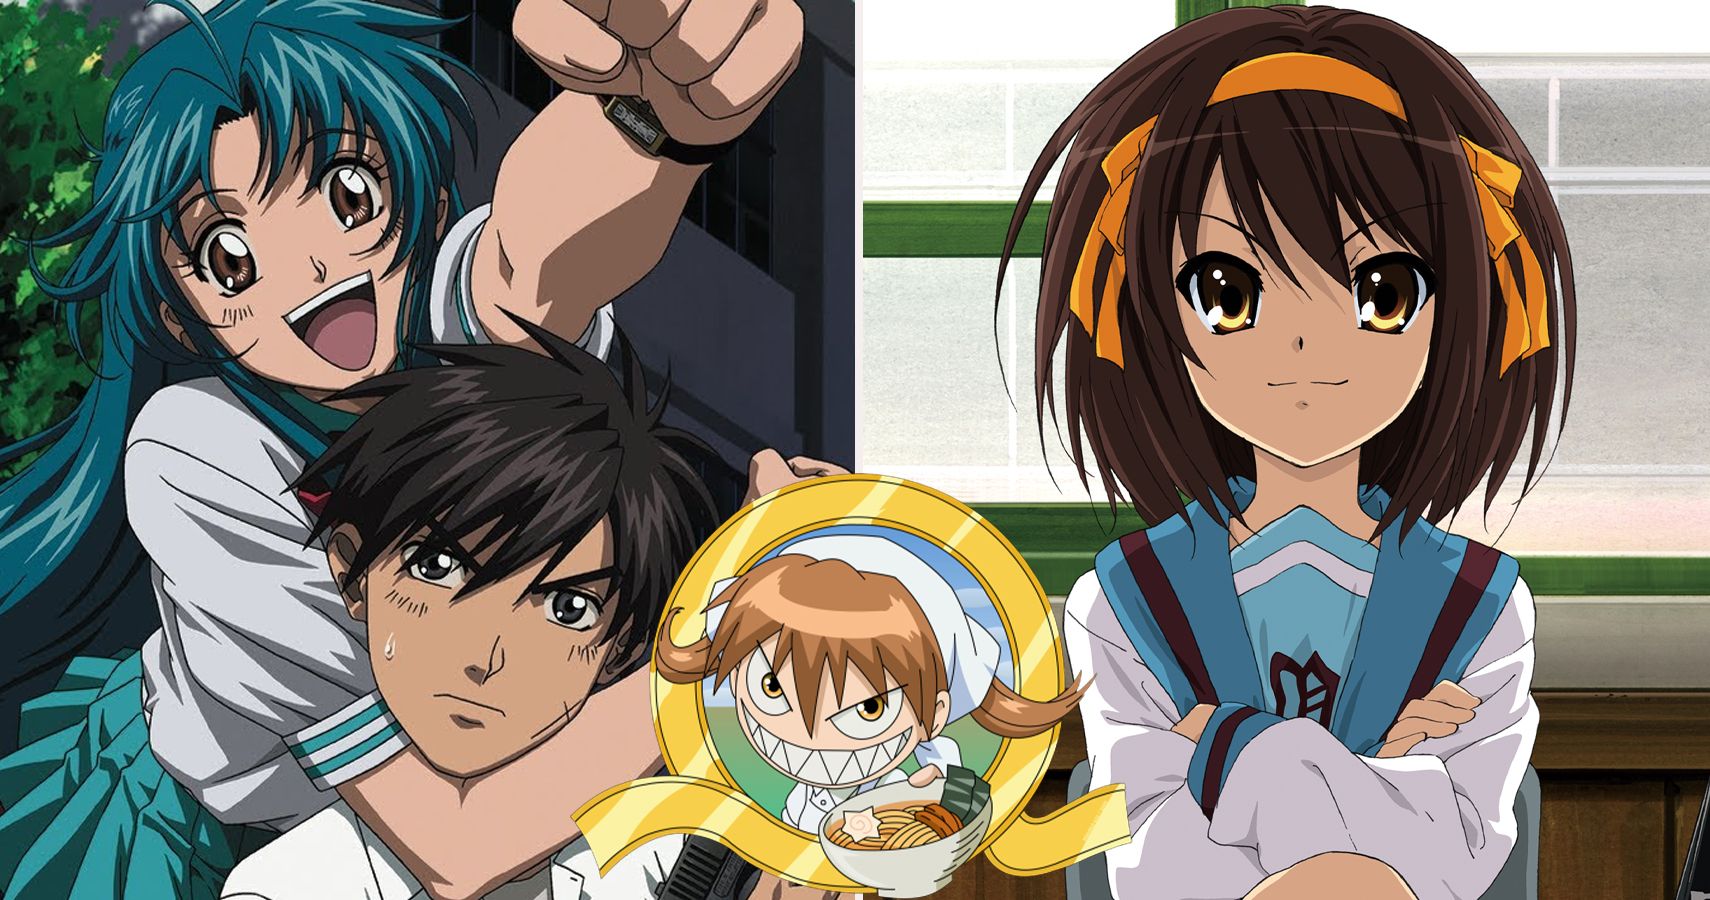 5 2000s Comedy Anime That Got Overlooked (& 5 That Were Way Too Popular)